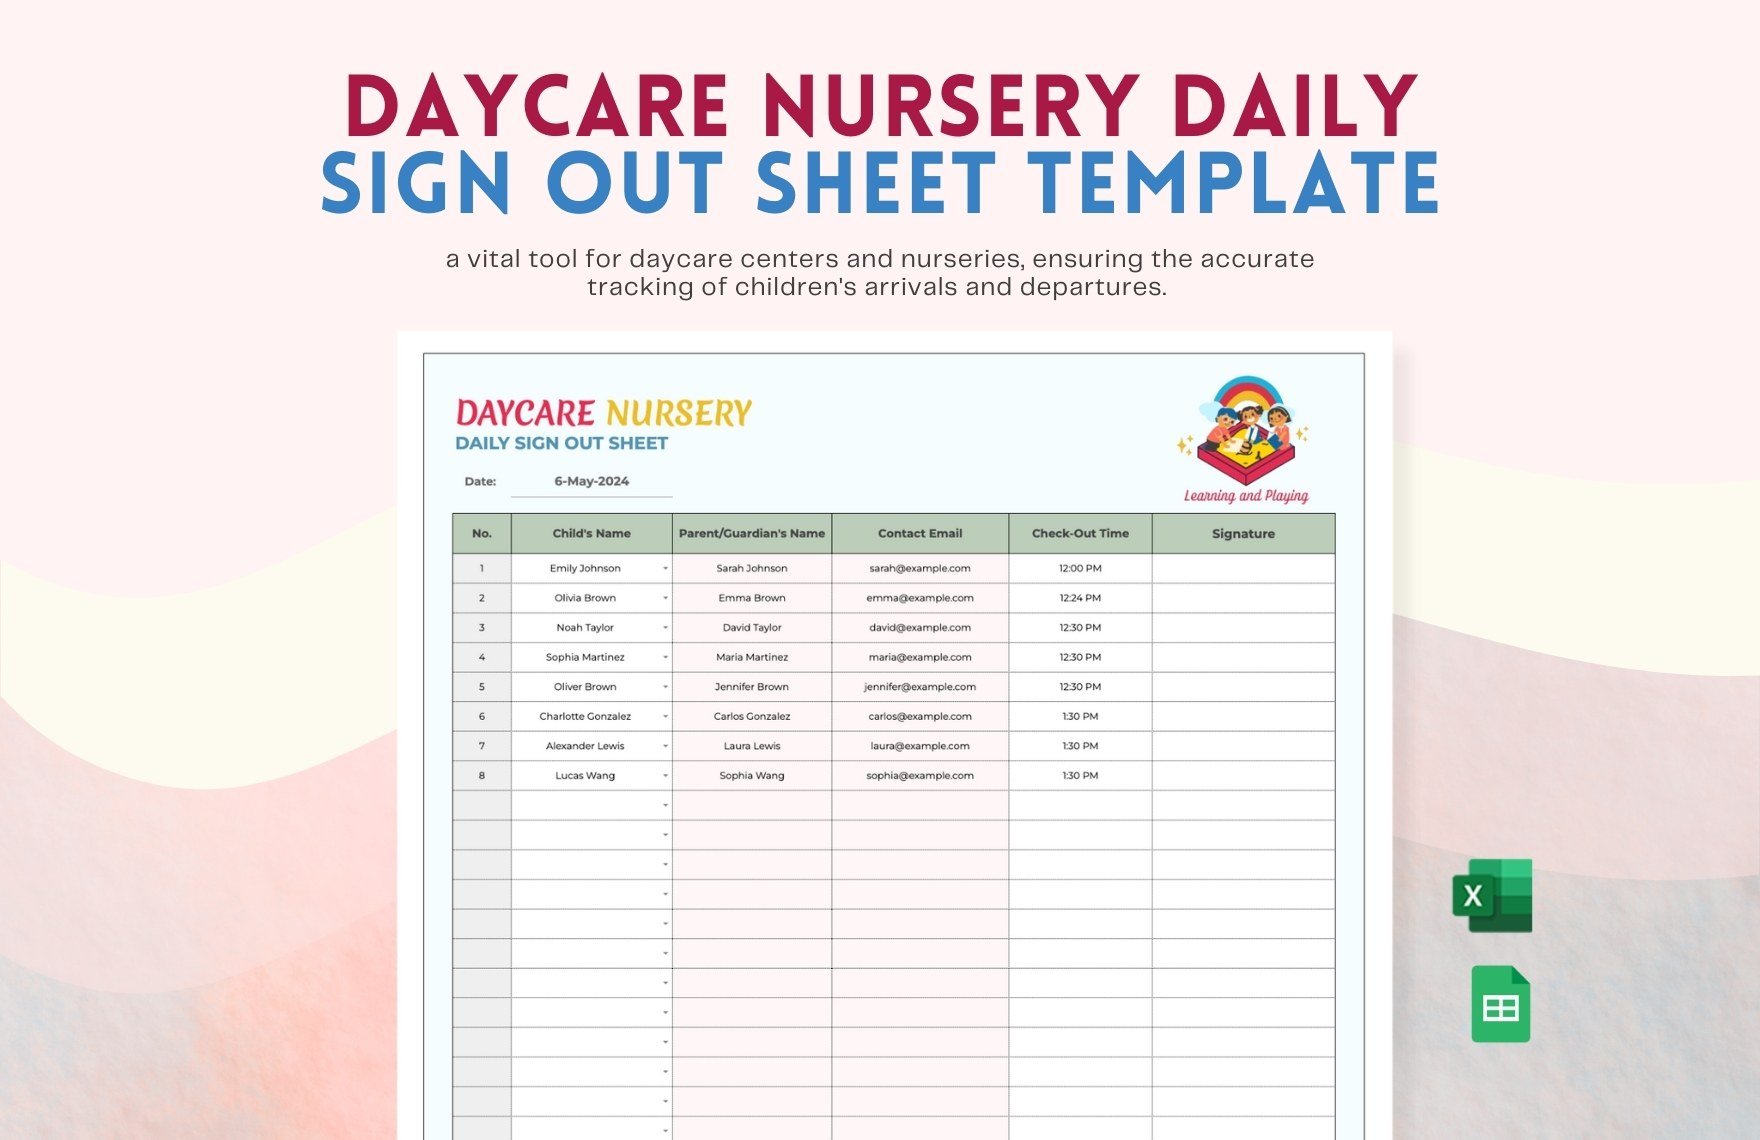 Free Daycare Nursery Daily Sign Out Sheet Template in Excel, Google Sheets